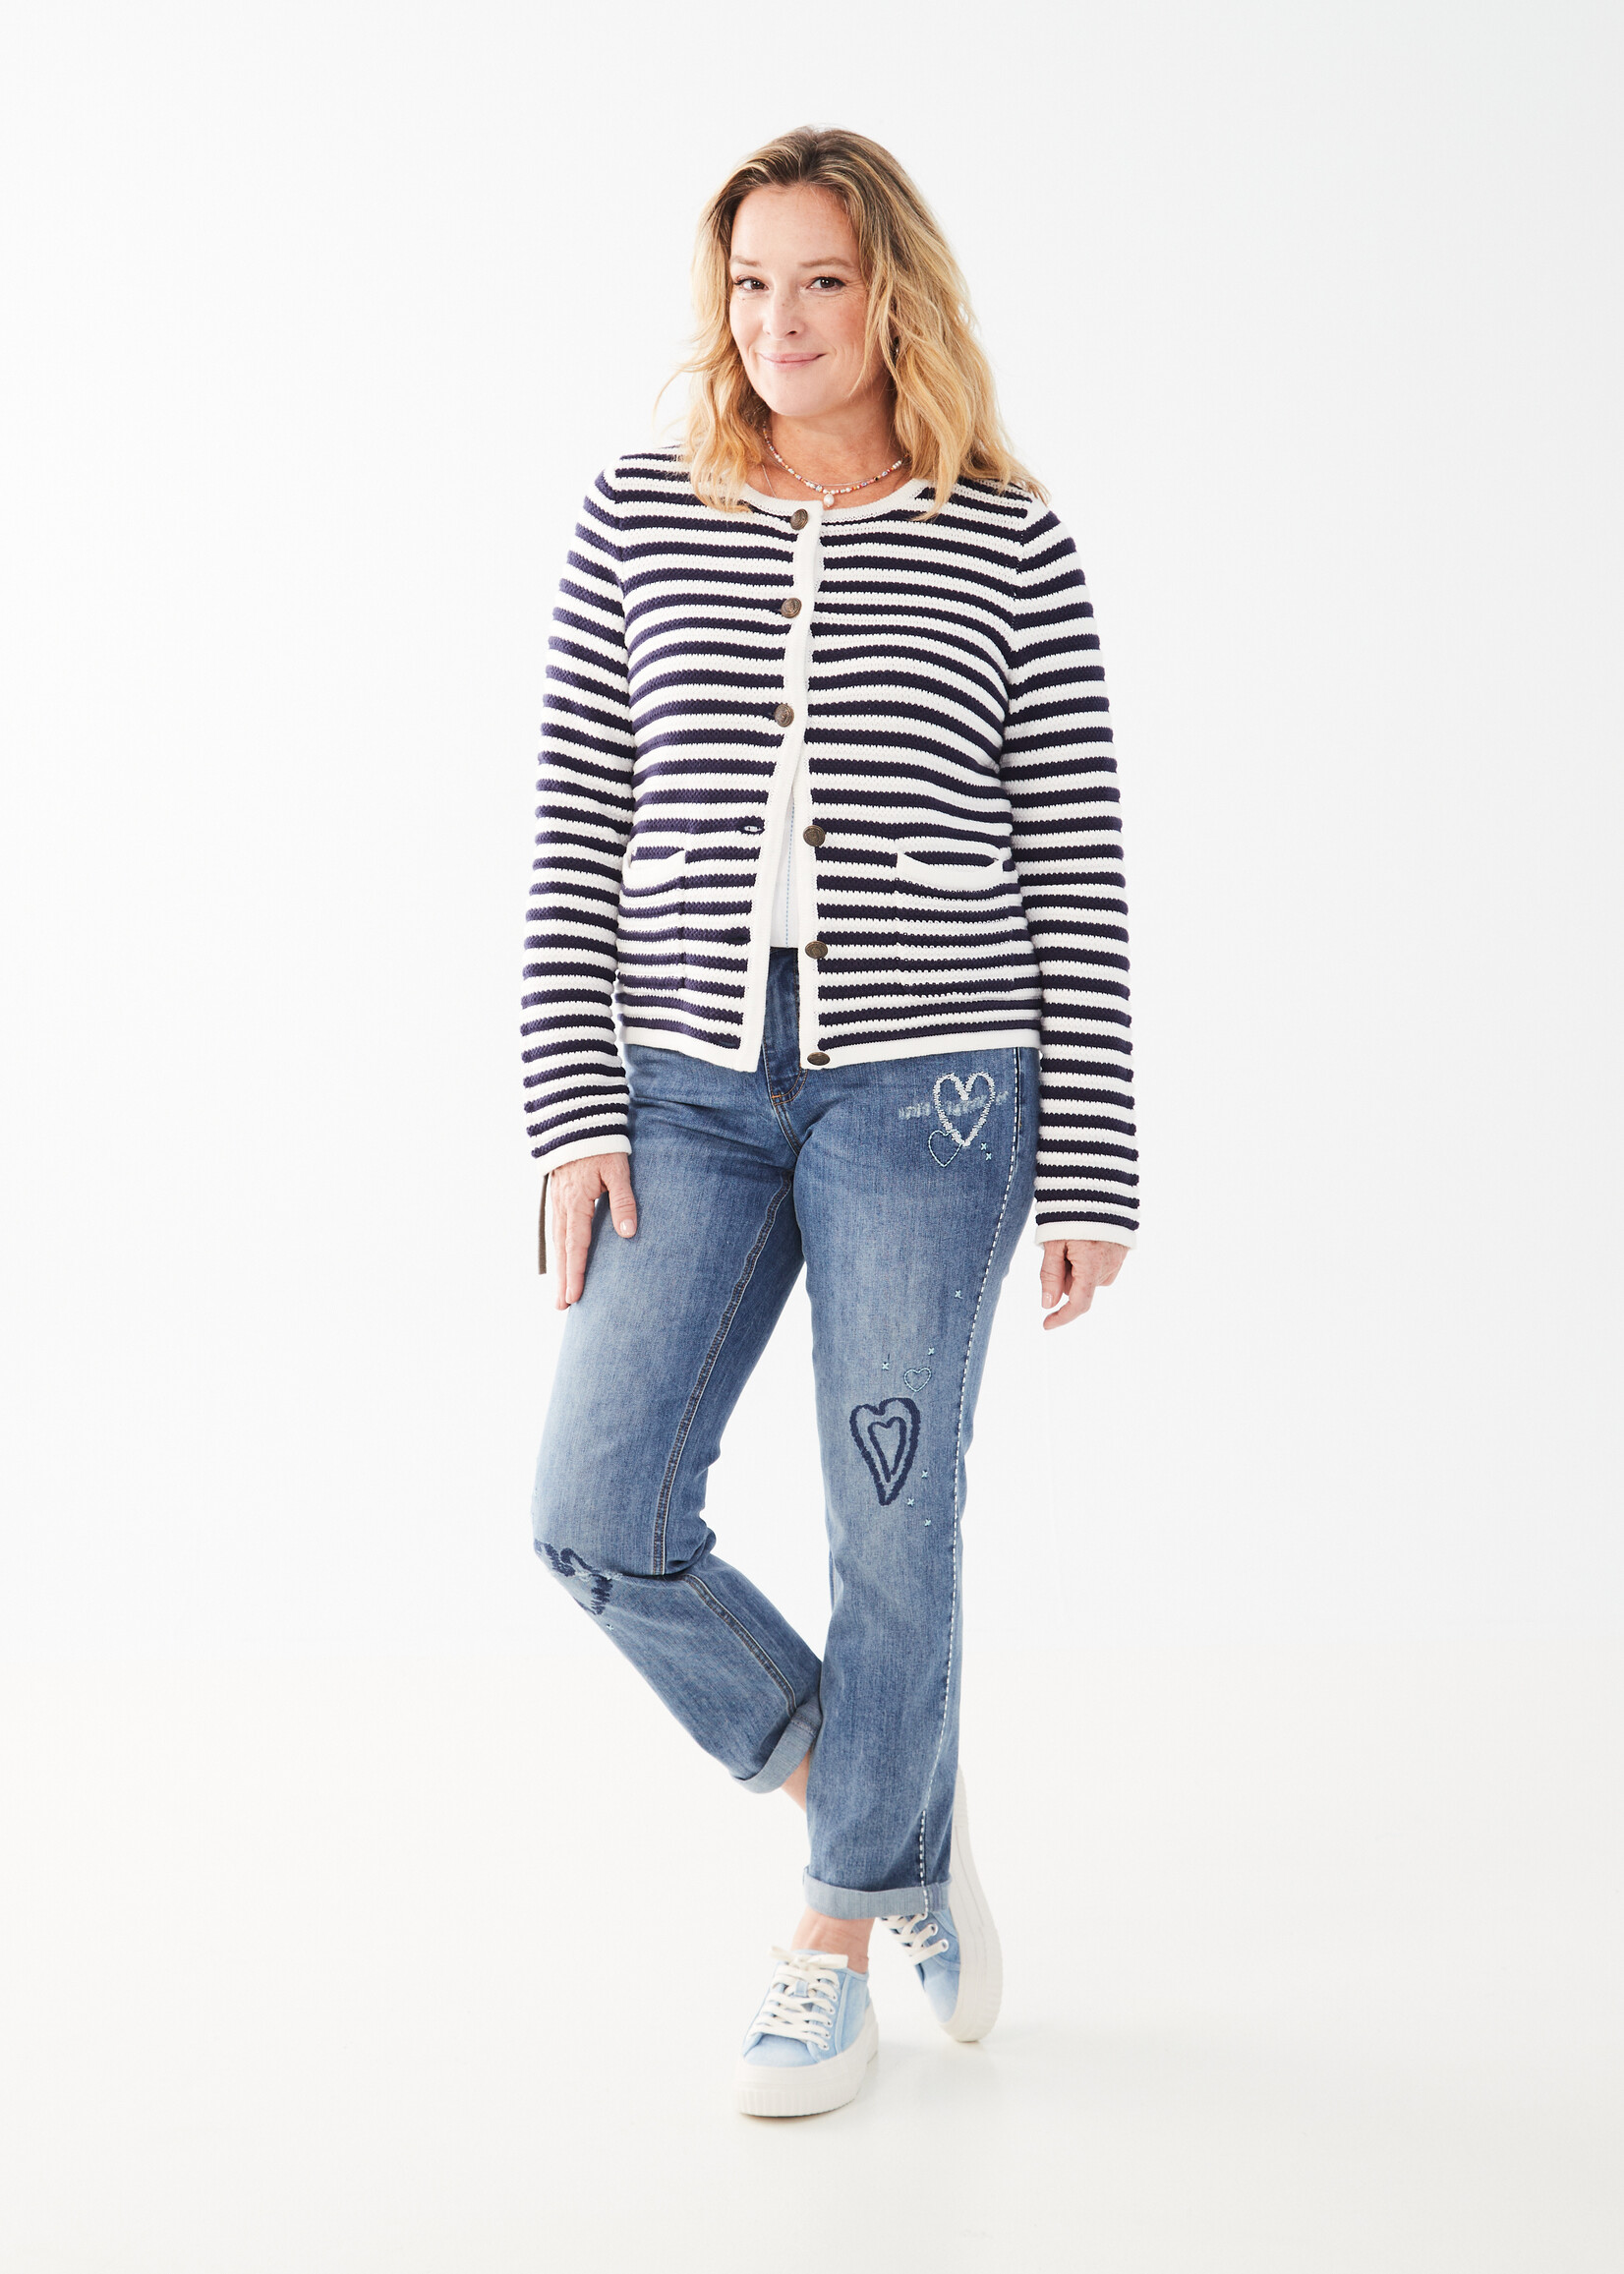 French Dressing Jeans FDJ Striped Chanel Style Cardi